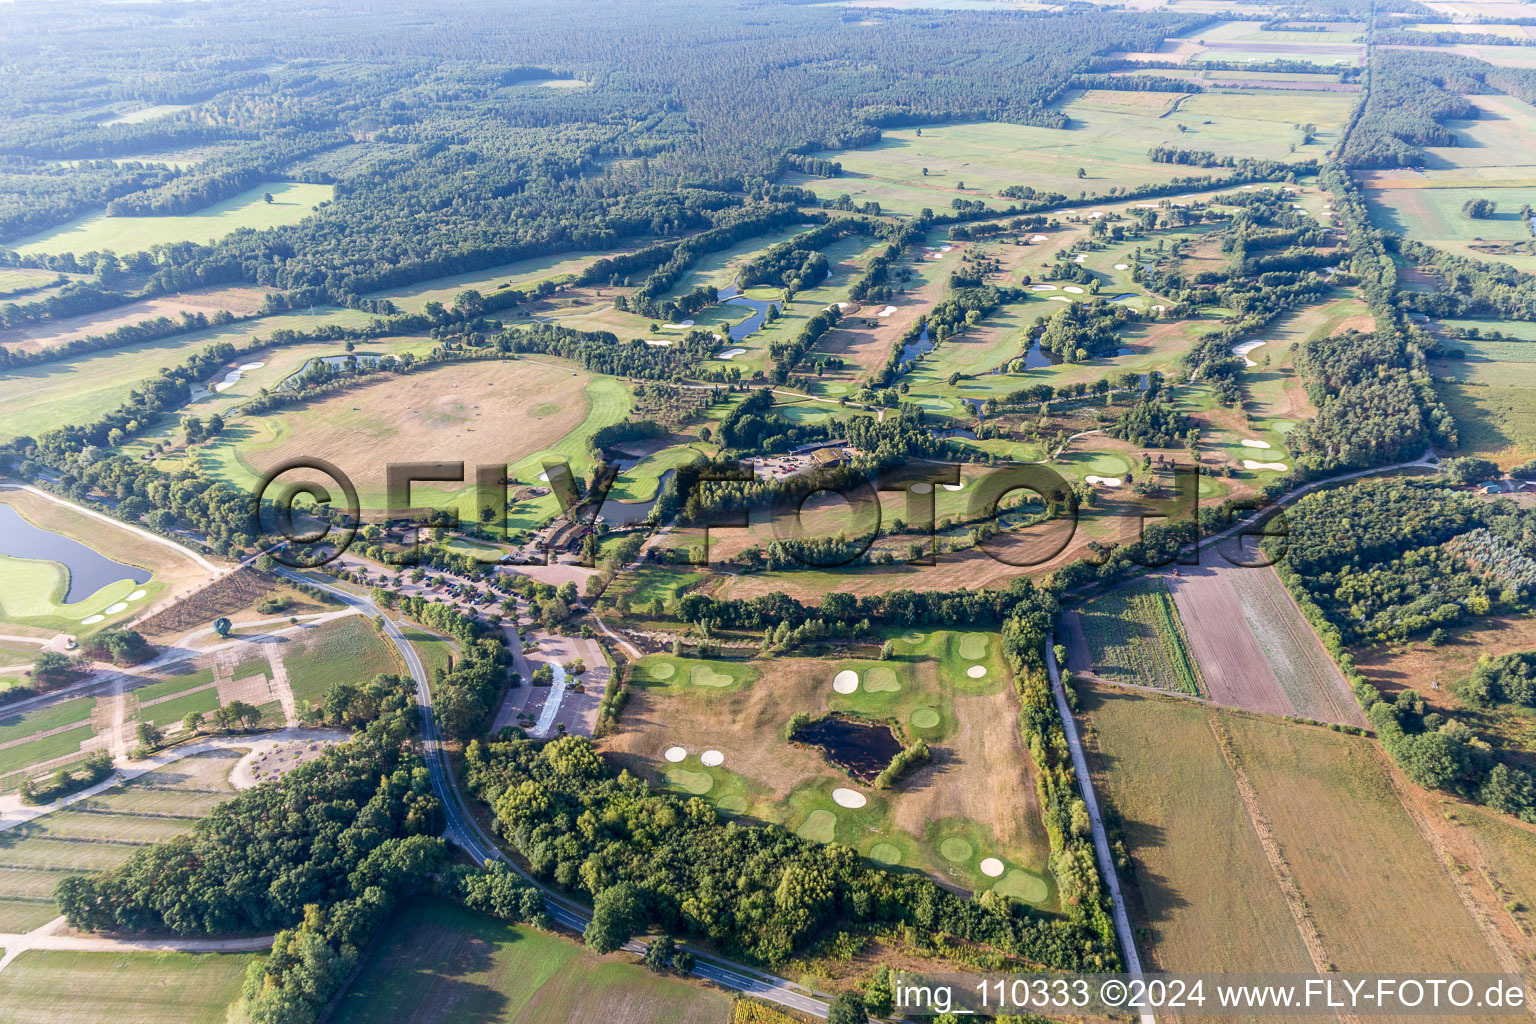 Grounds of the Golf course at Green Eagle Golf Courses in Winsen (Luhe) in the state Lower Saxony, Germany from above